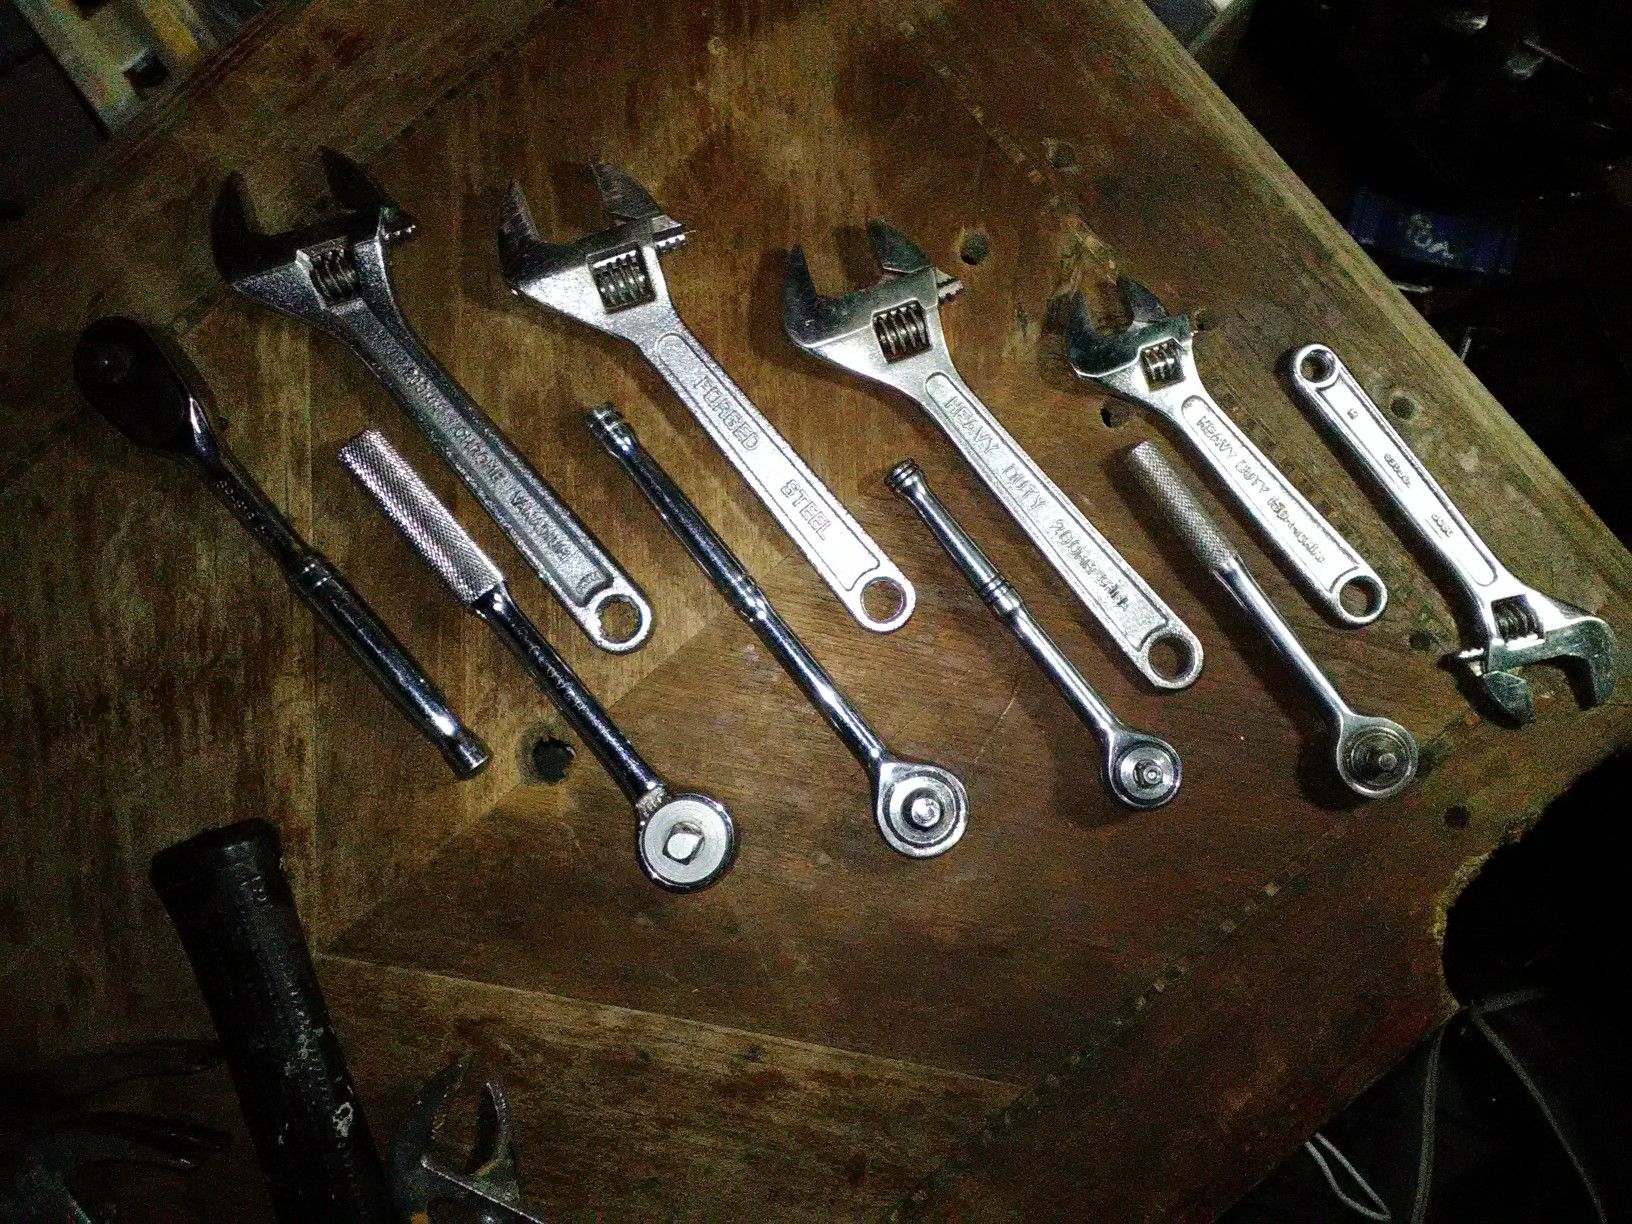 Ratchets + Wrenches